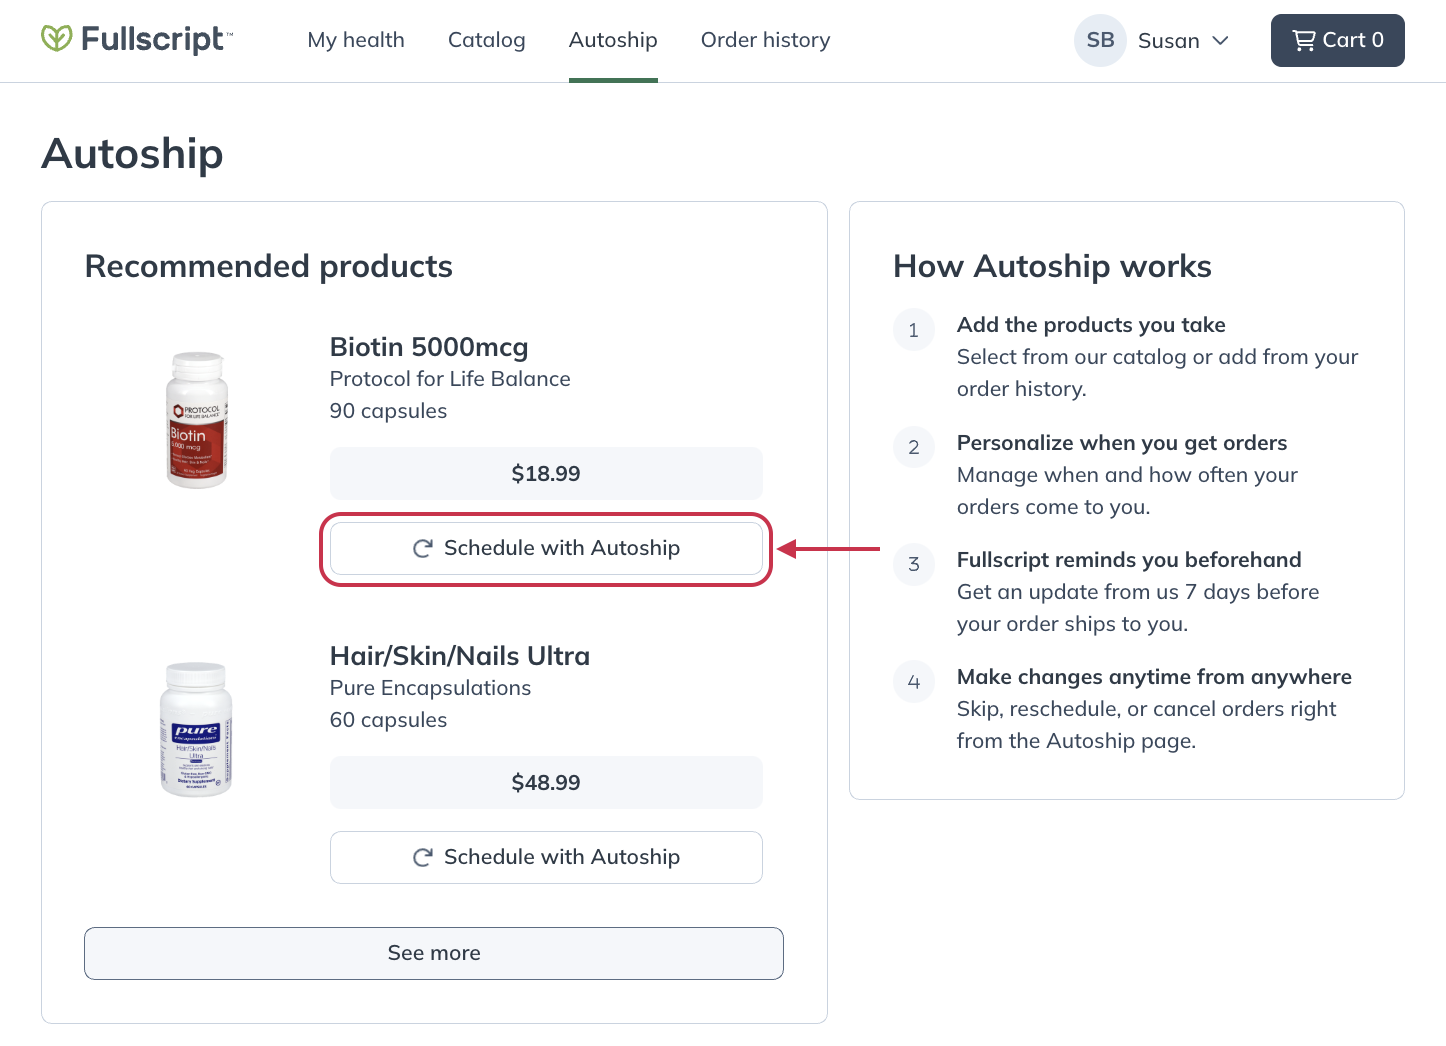 Adding products to an Autoship schedule from the Autoship page